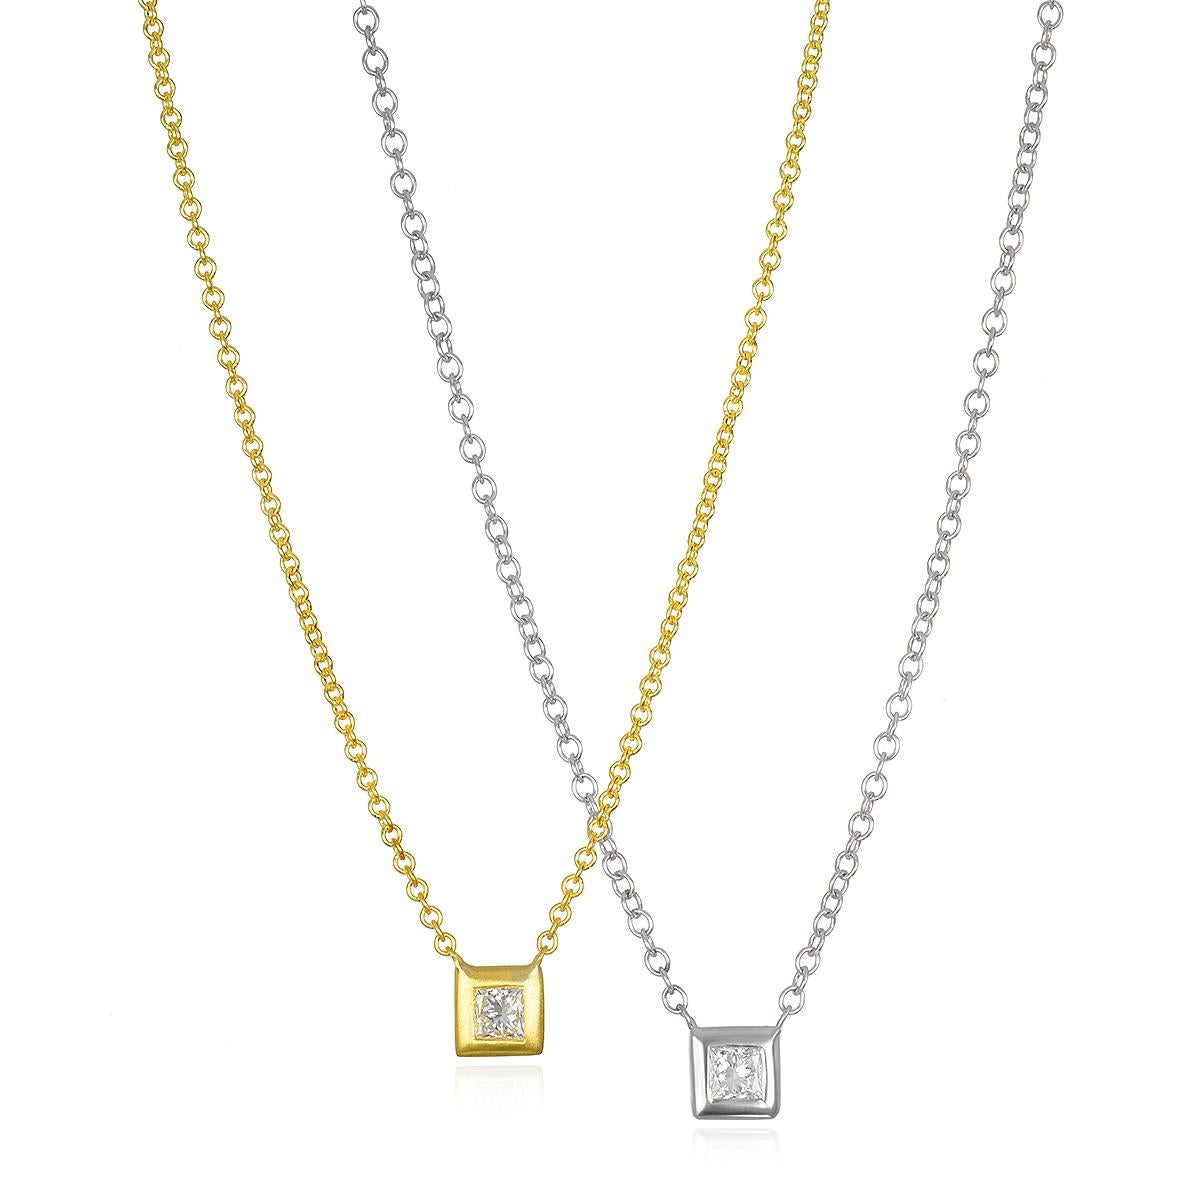 When you want just a bit of sparkle and pop, Faye Kim's Princess-cut diamond station necklace is the perfect solution. Bezel set in Faye's signature 18k green gold with a matte finish.
Wear alone or layer with longer, larger necklaces.

Diamond .11